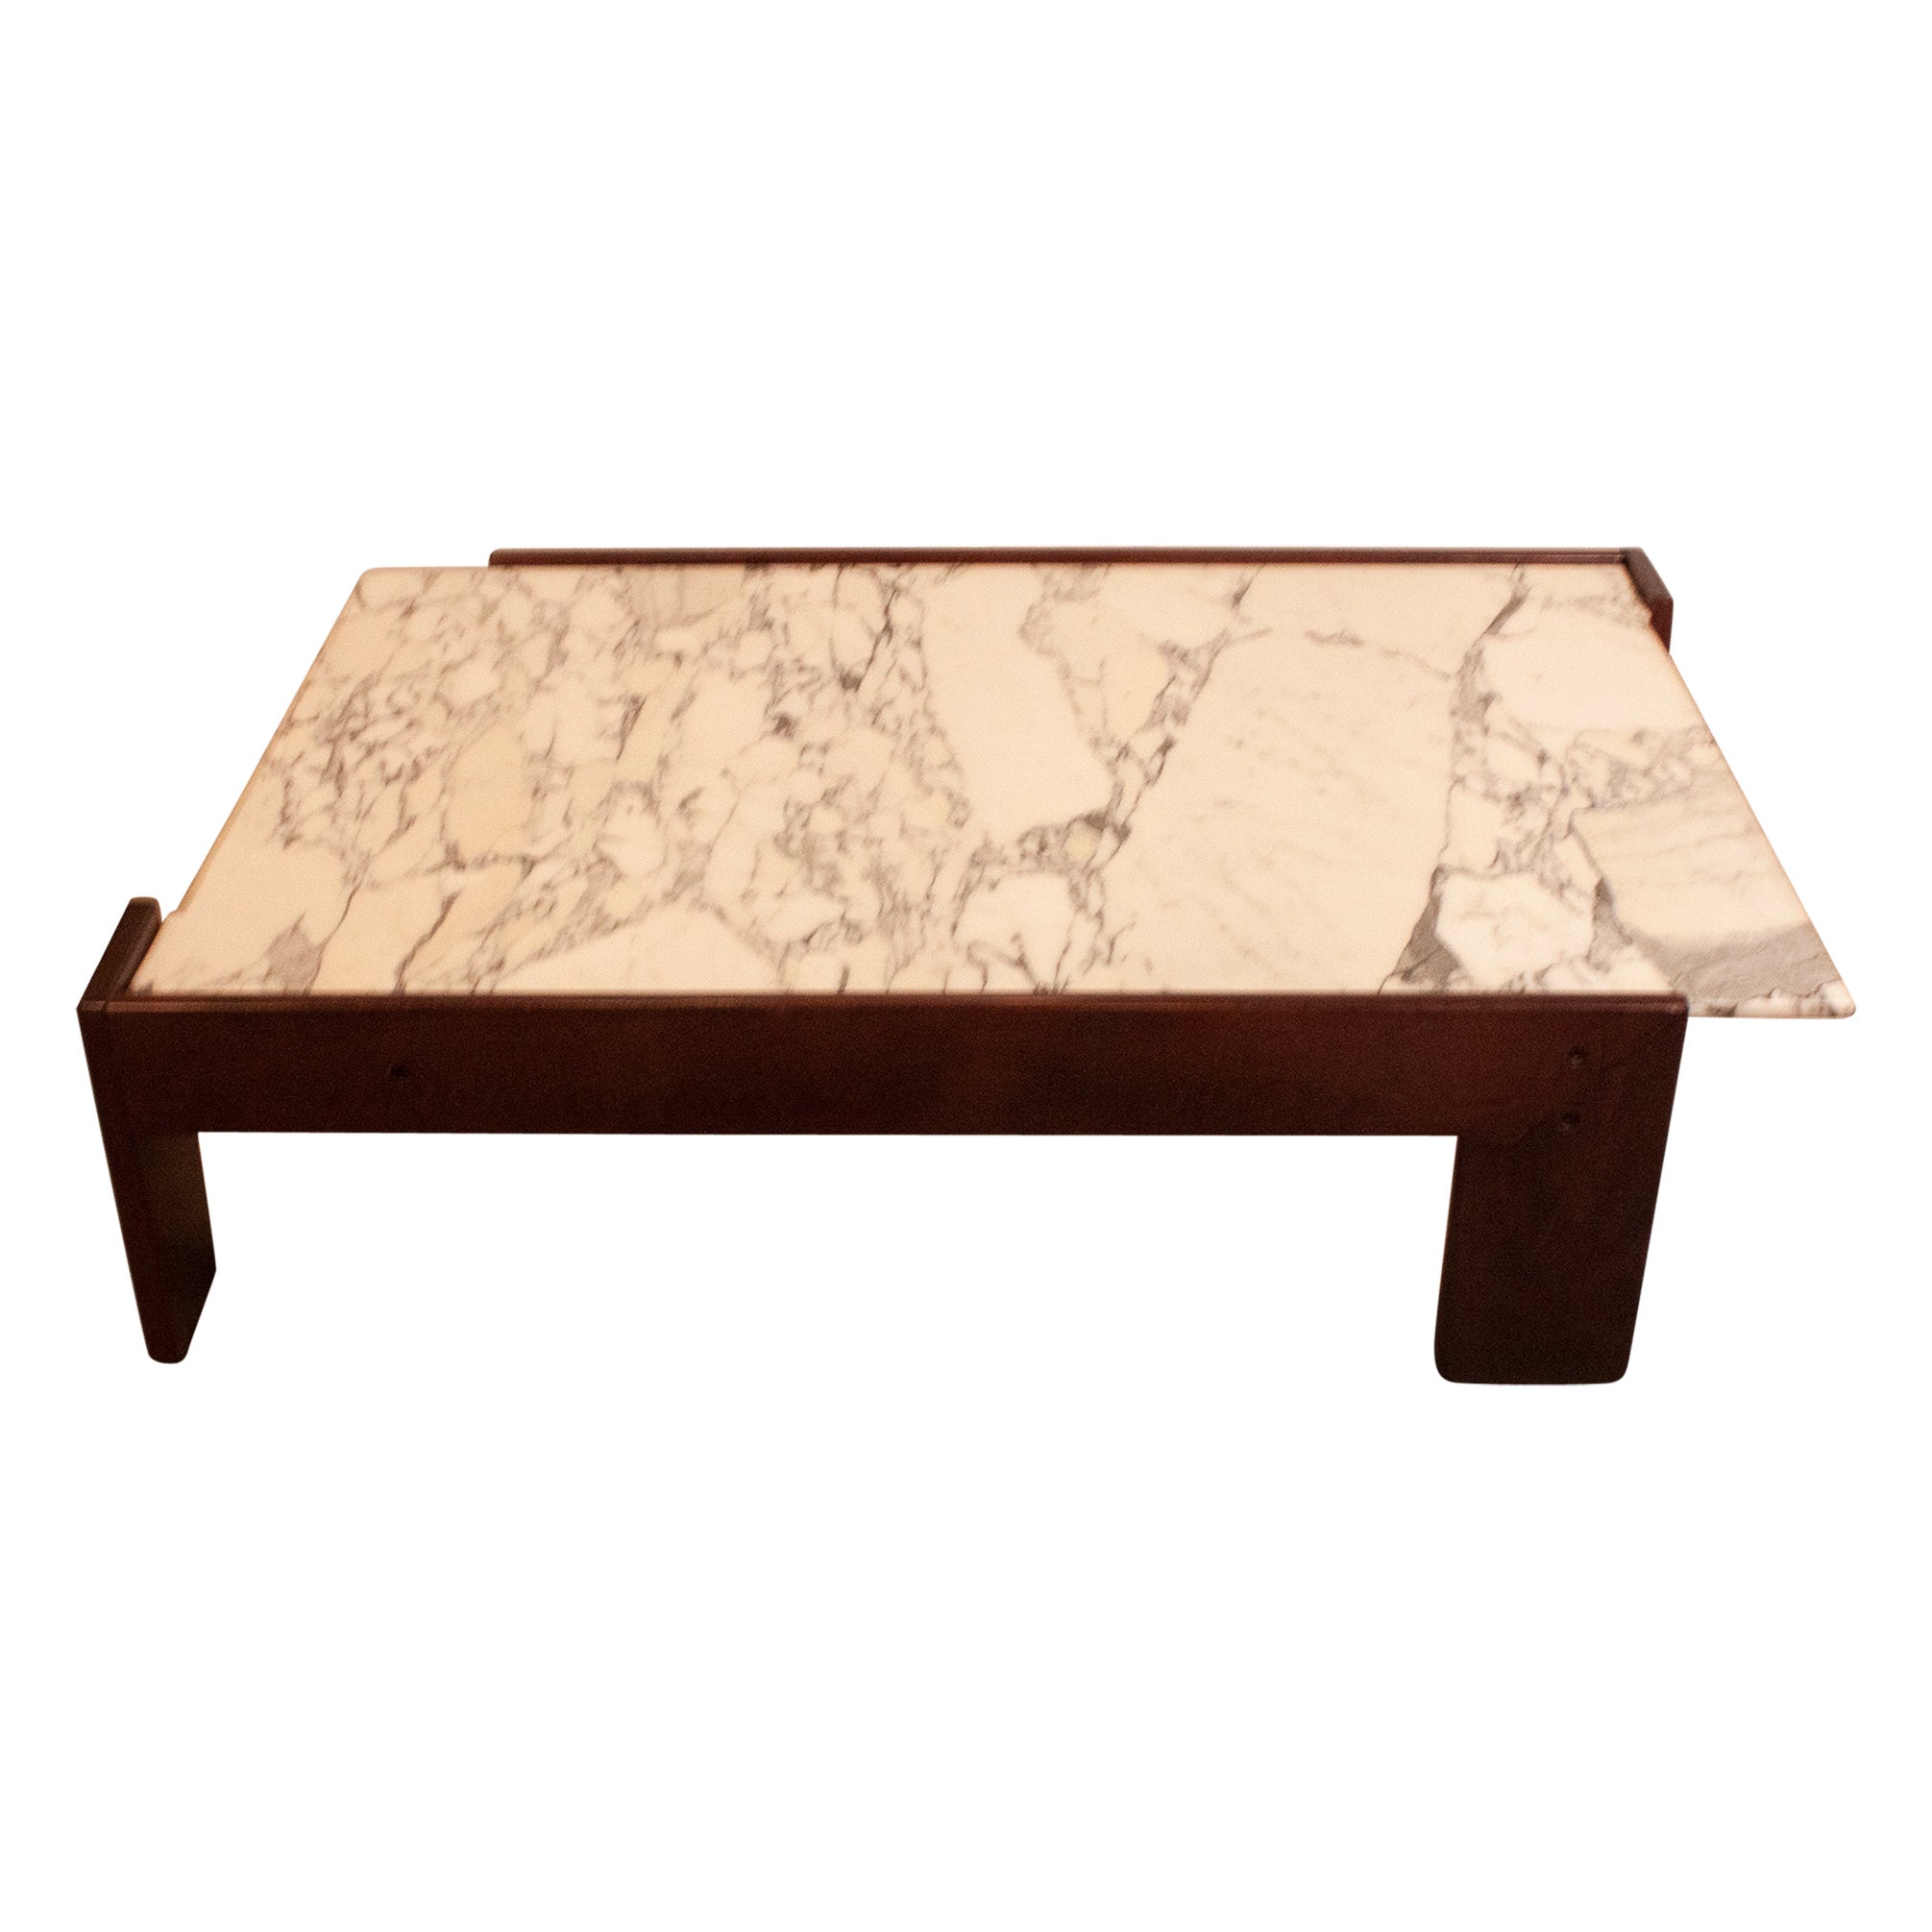 Coffee Table, Wood and Marble Designed by Antonio Moragas, Spain, 1970's